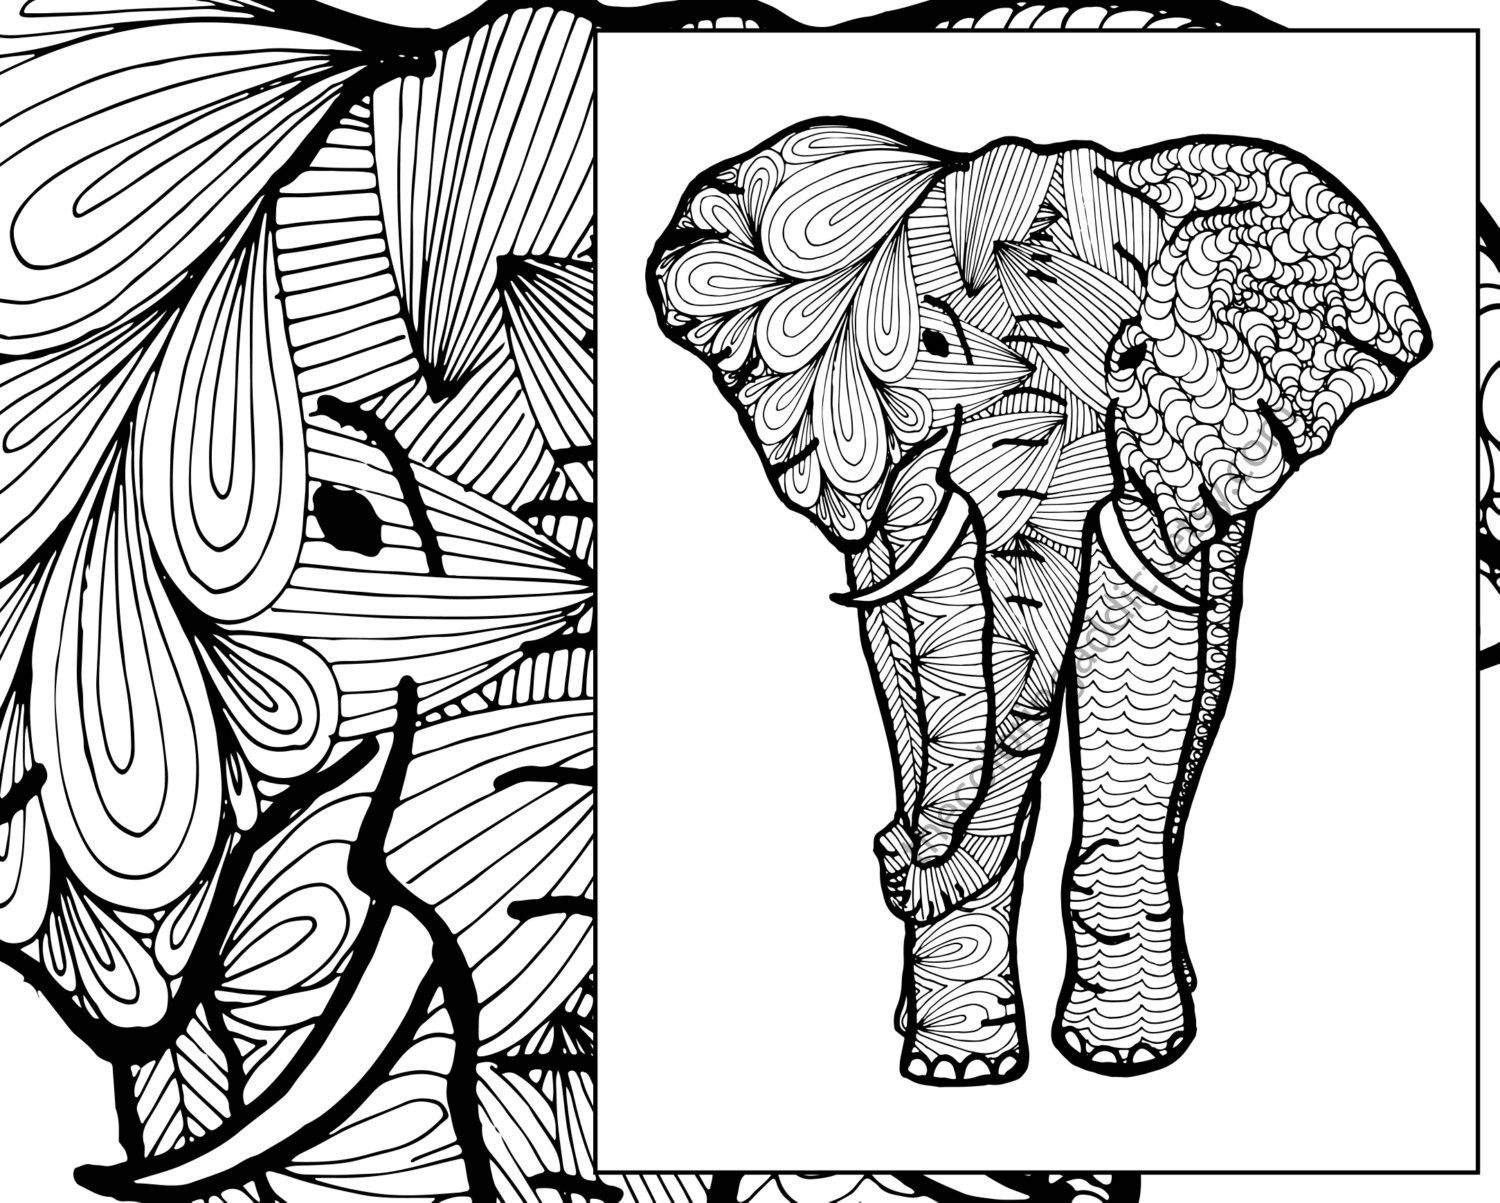 tribal-elephant-coloring-pages-for-adults-3.jpg